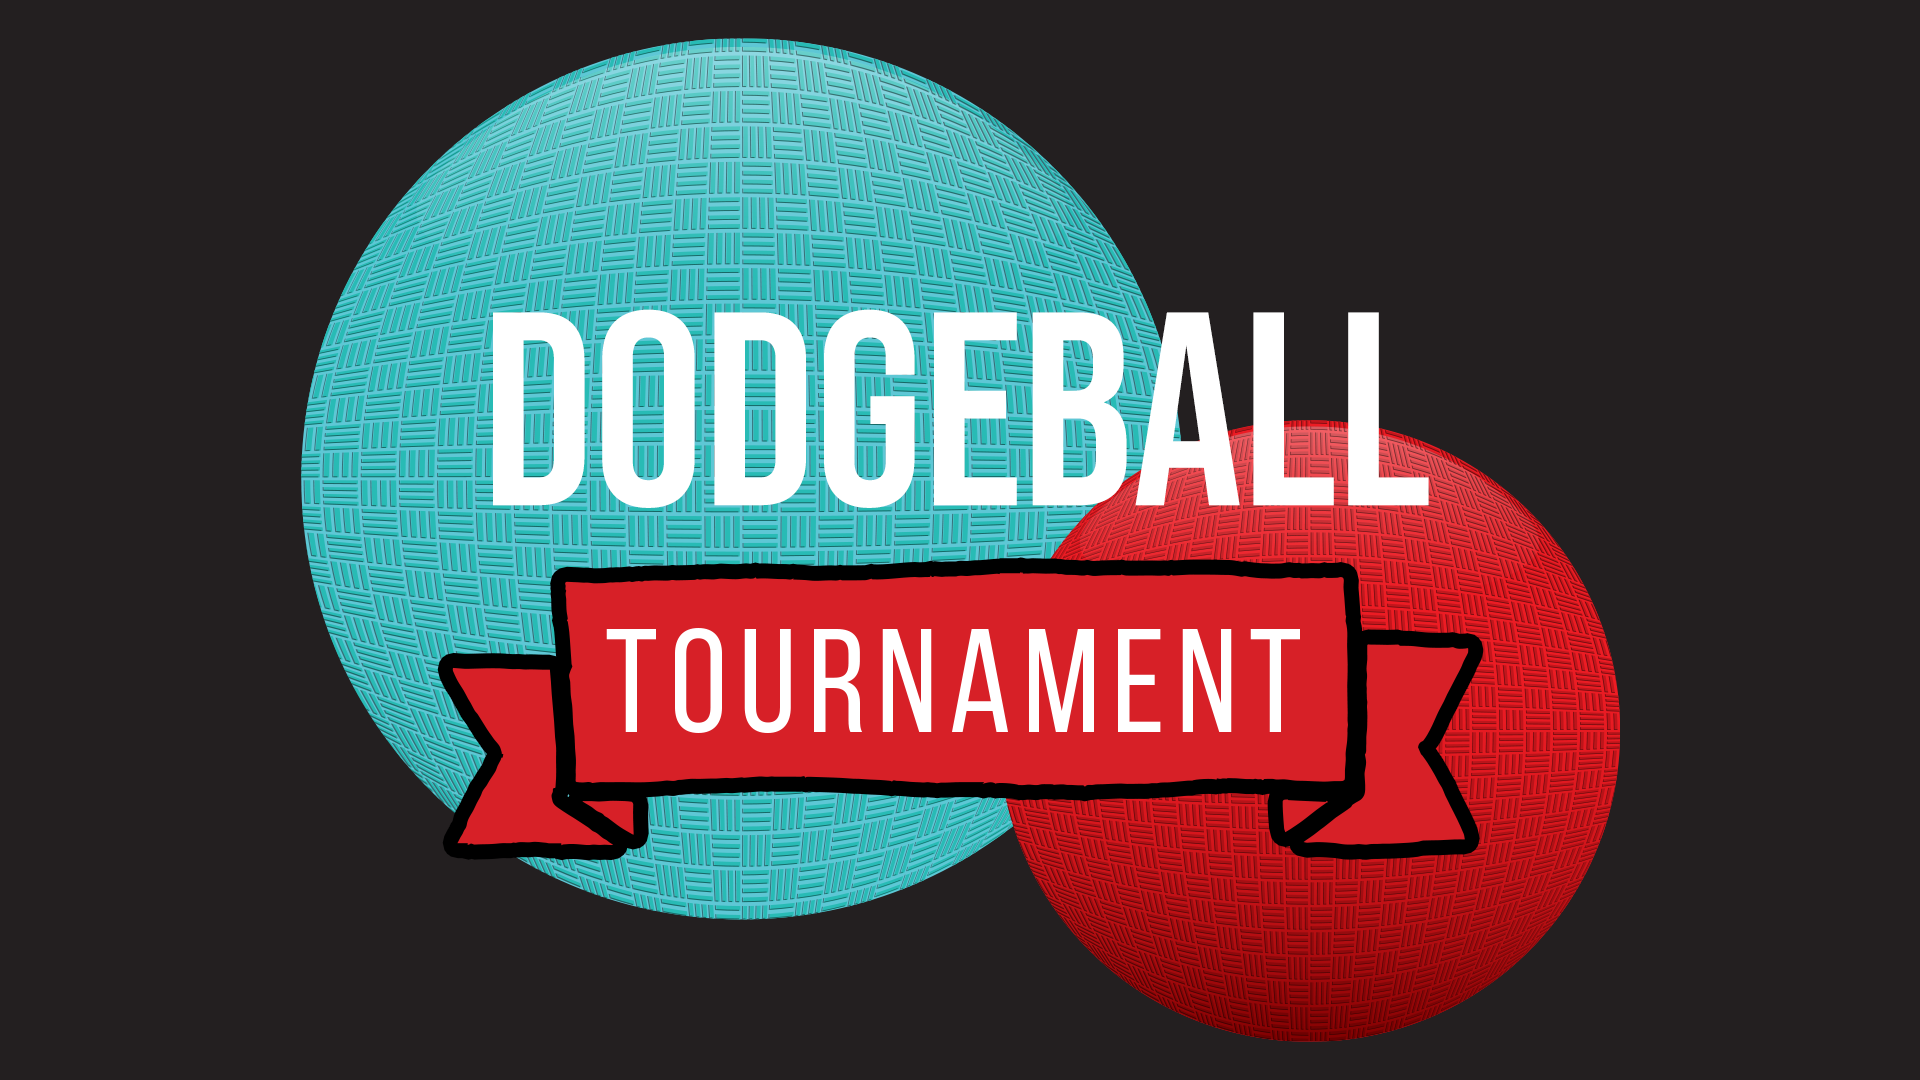 Dodgeball Tournament

Friday | 6:30pm
March 31
